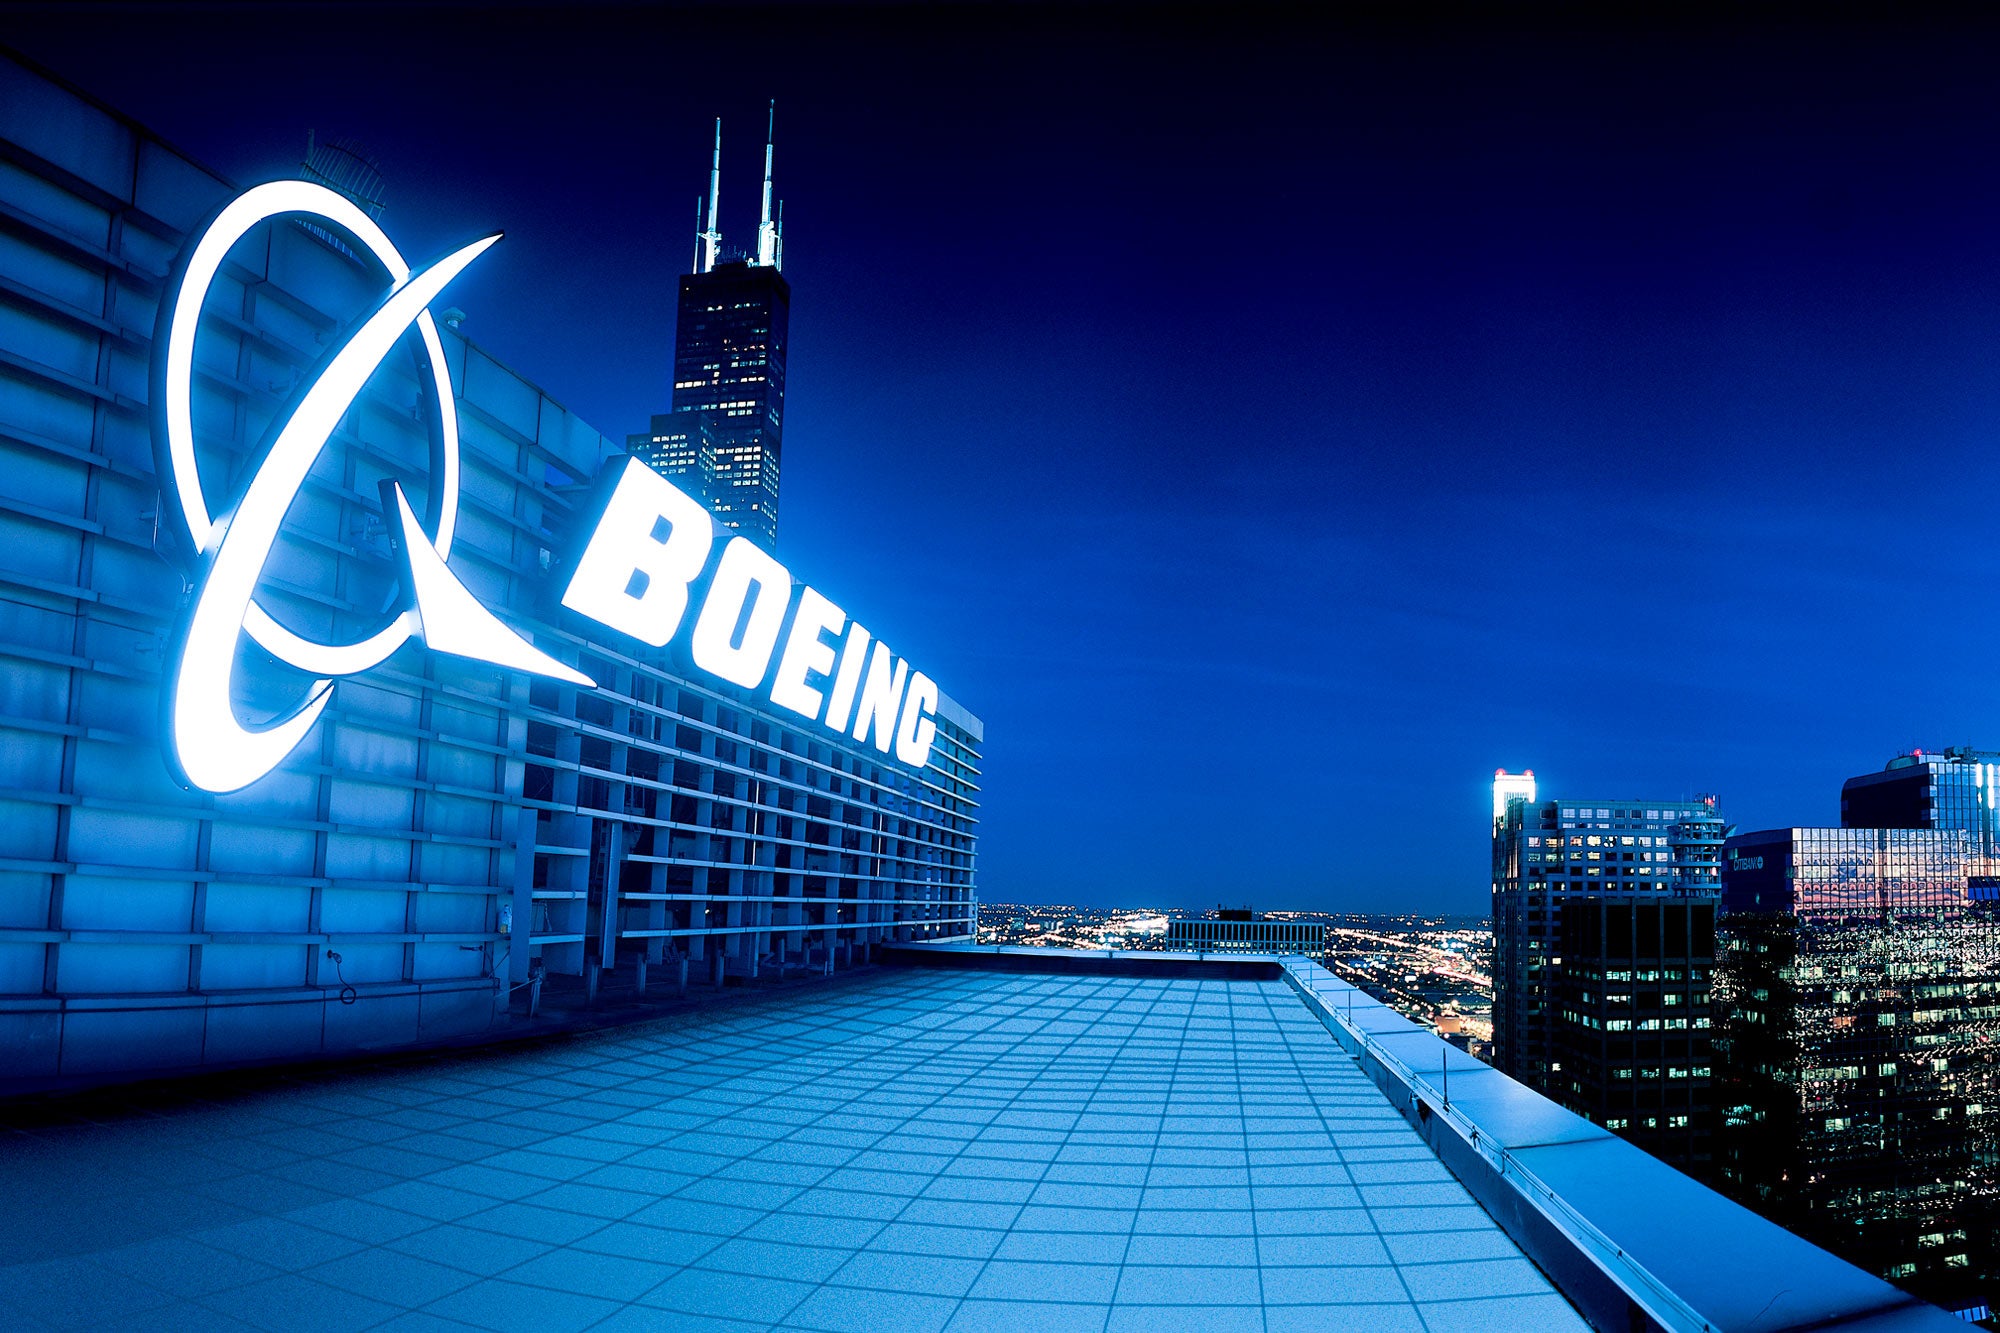 Boeing’s 147-Satellite Constellation Approved for Broadband Internet